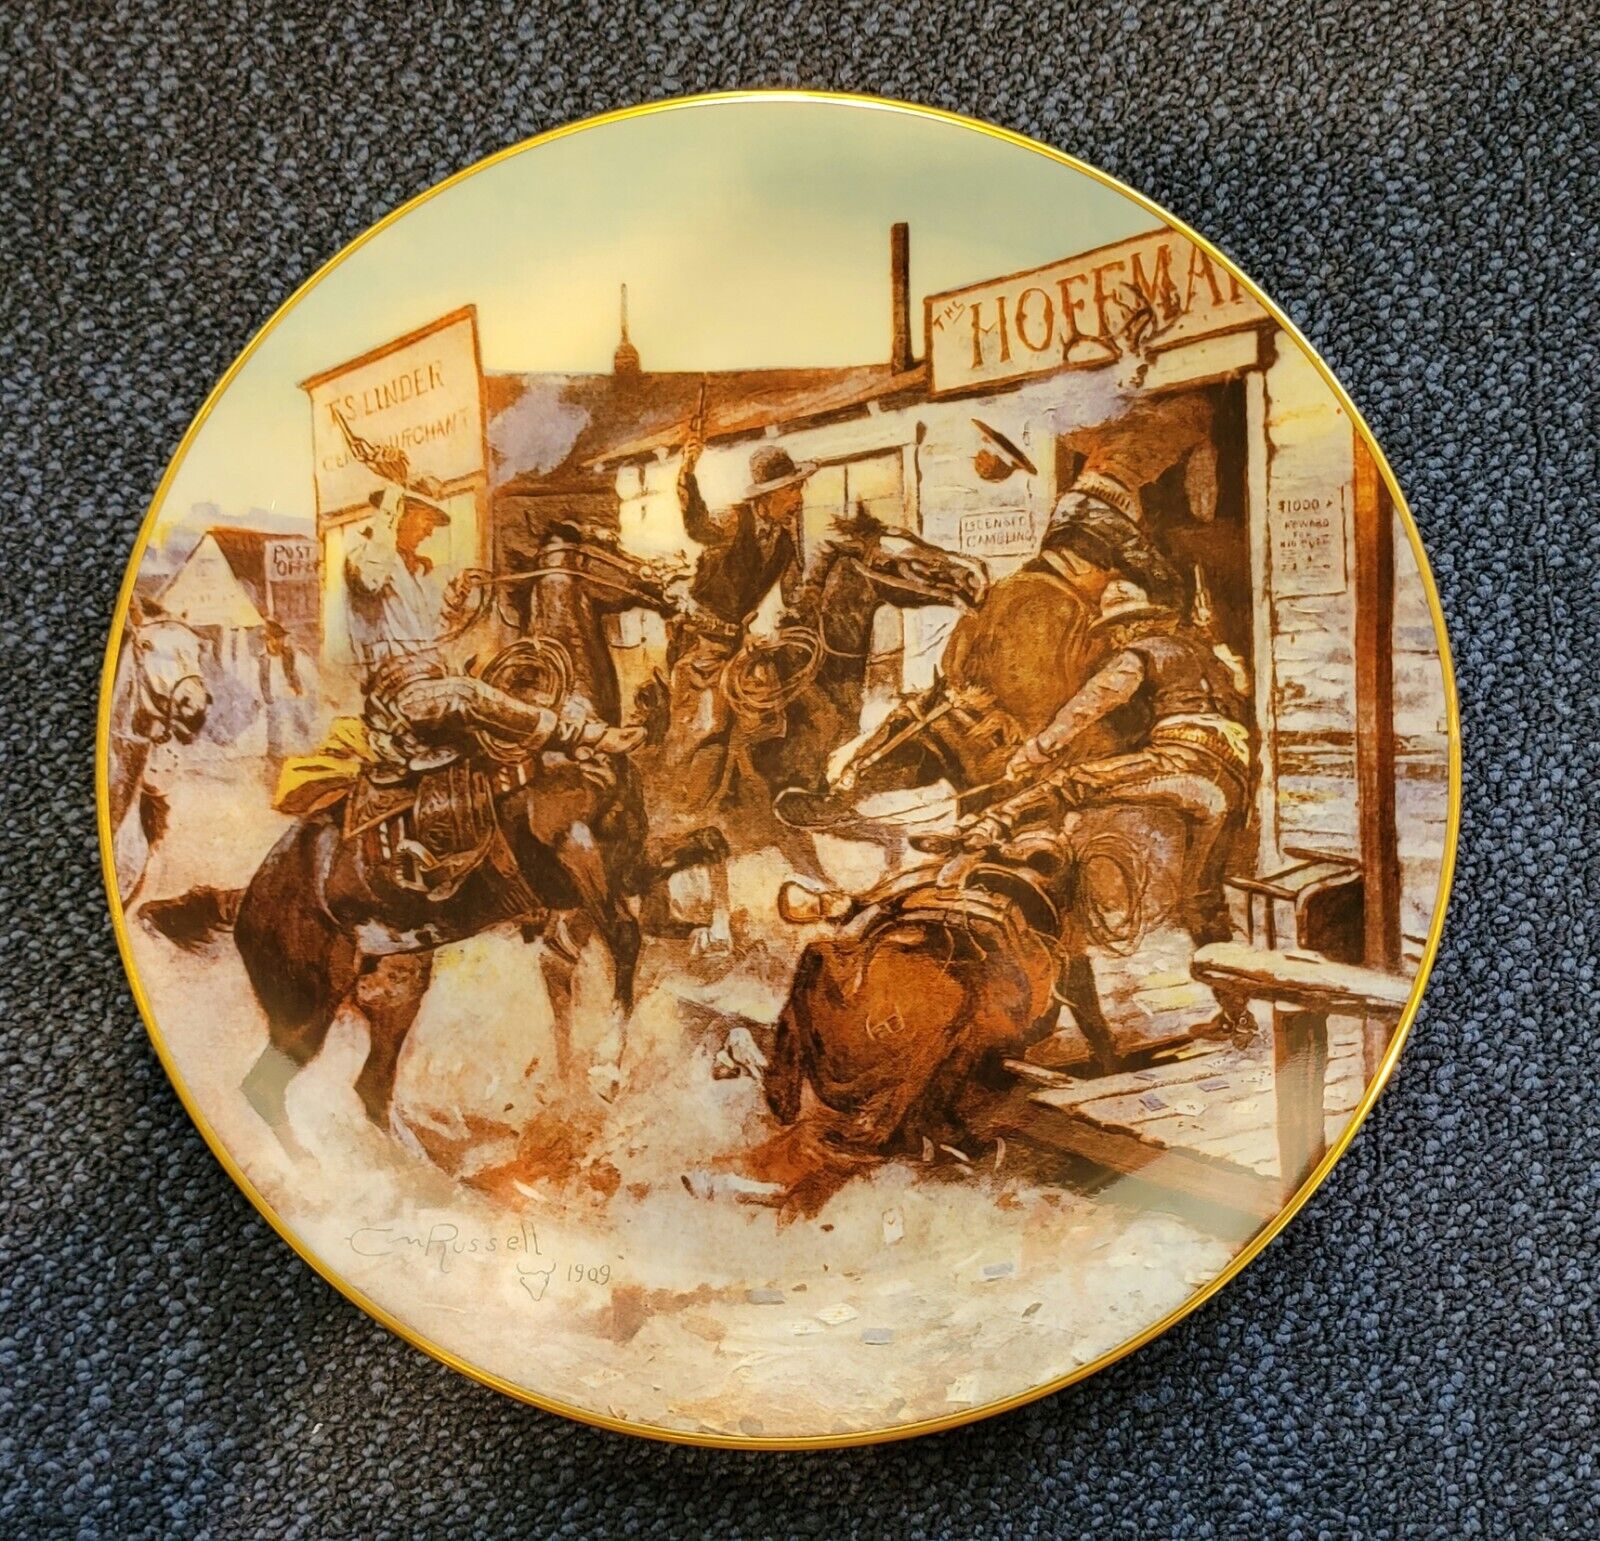 GORHAM FINE CHINA PLATE WILD WEST SERIES ARTIST CHARLES RUSSELL COLLECTIBLE